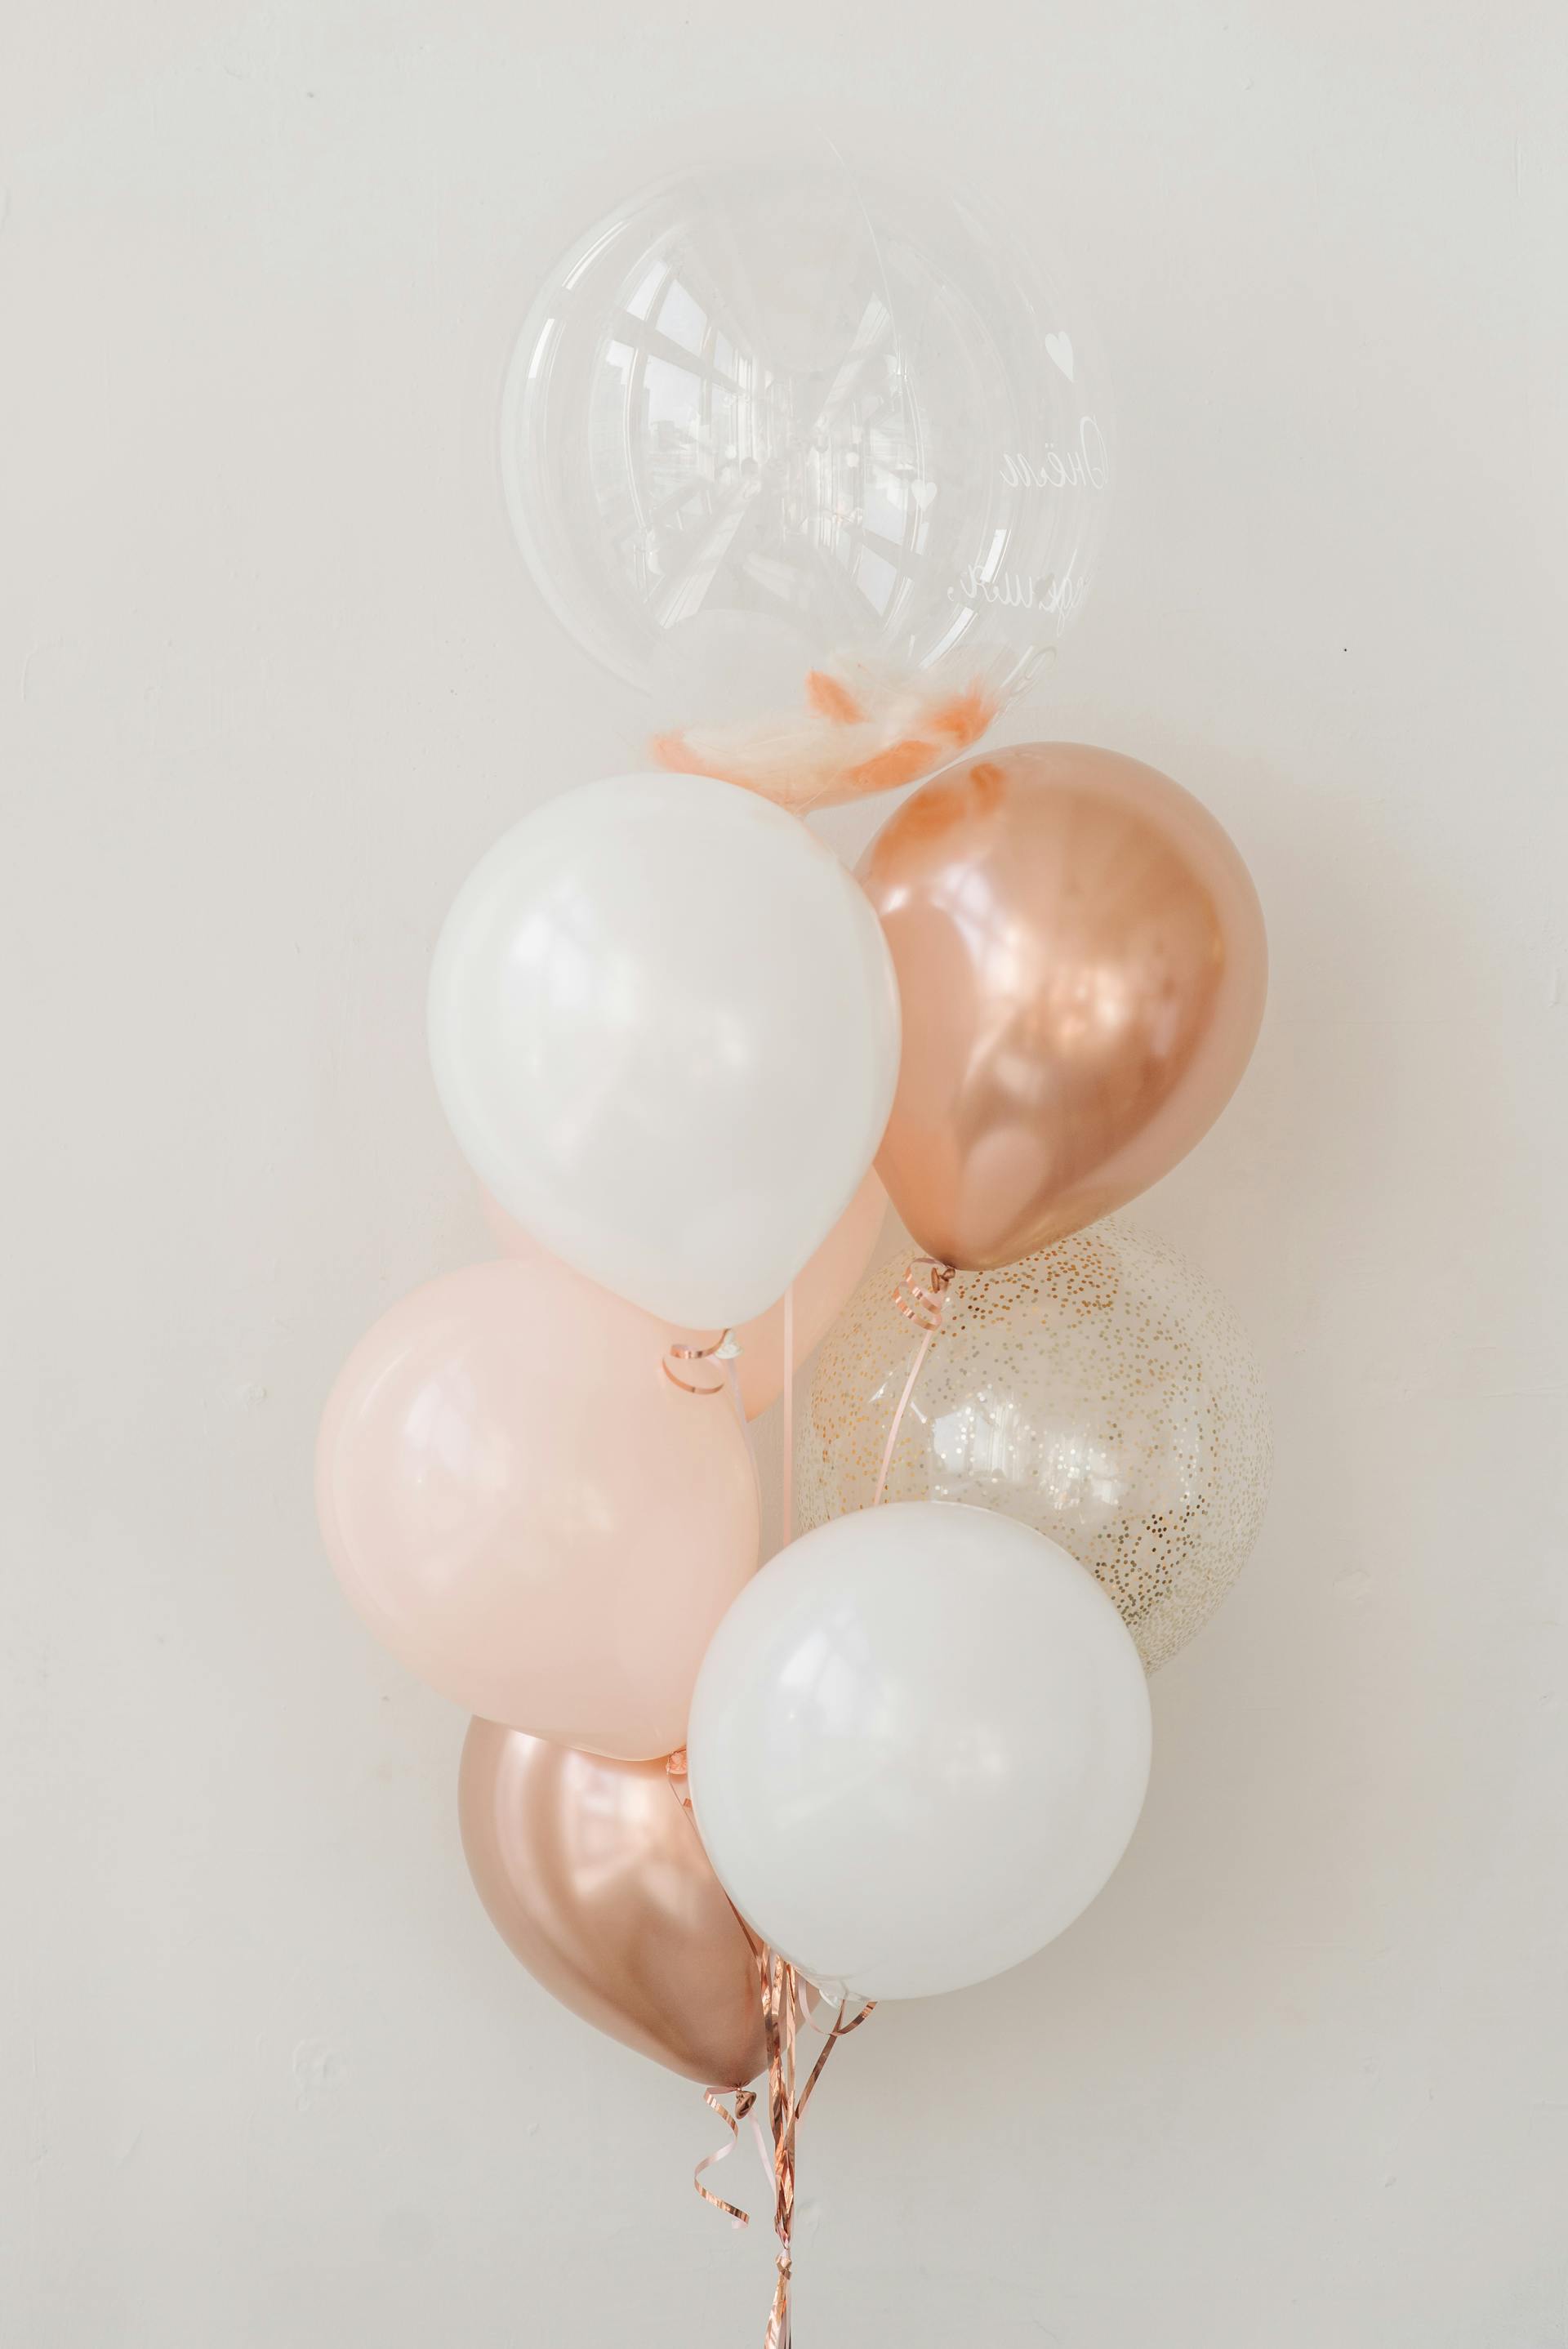 Balloons beside a white wall | Source: Pexels